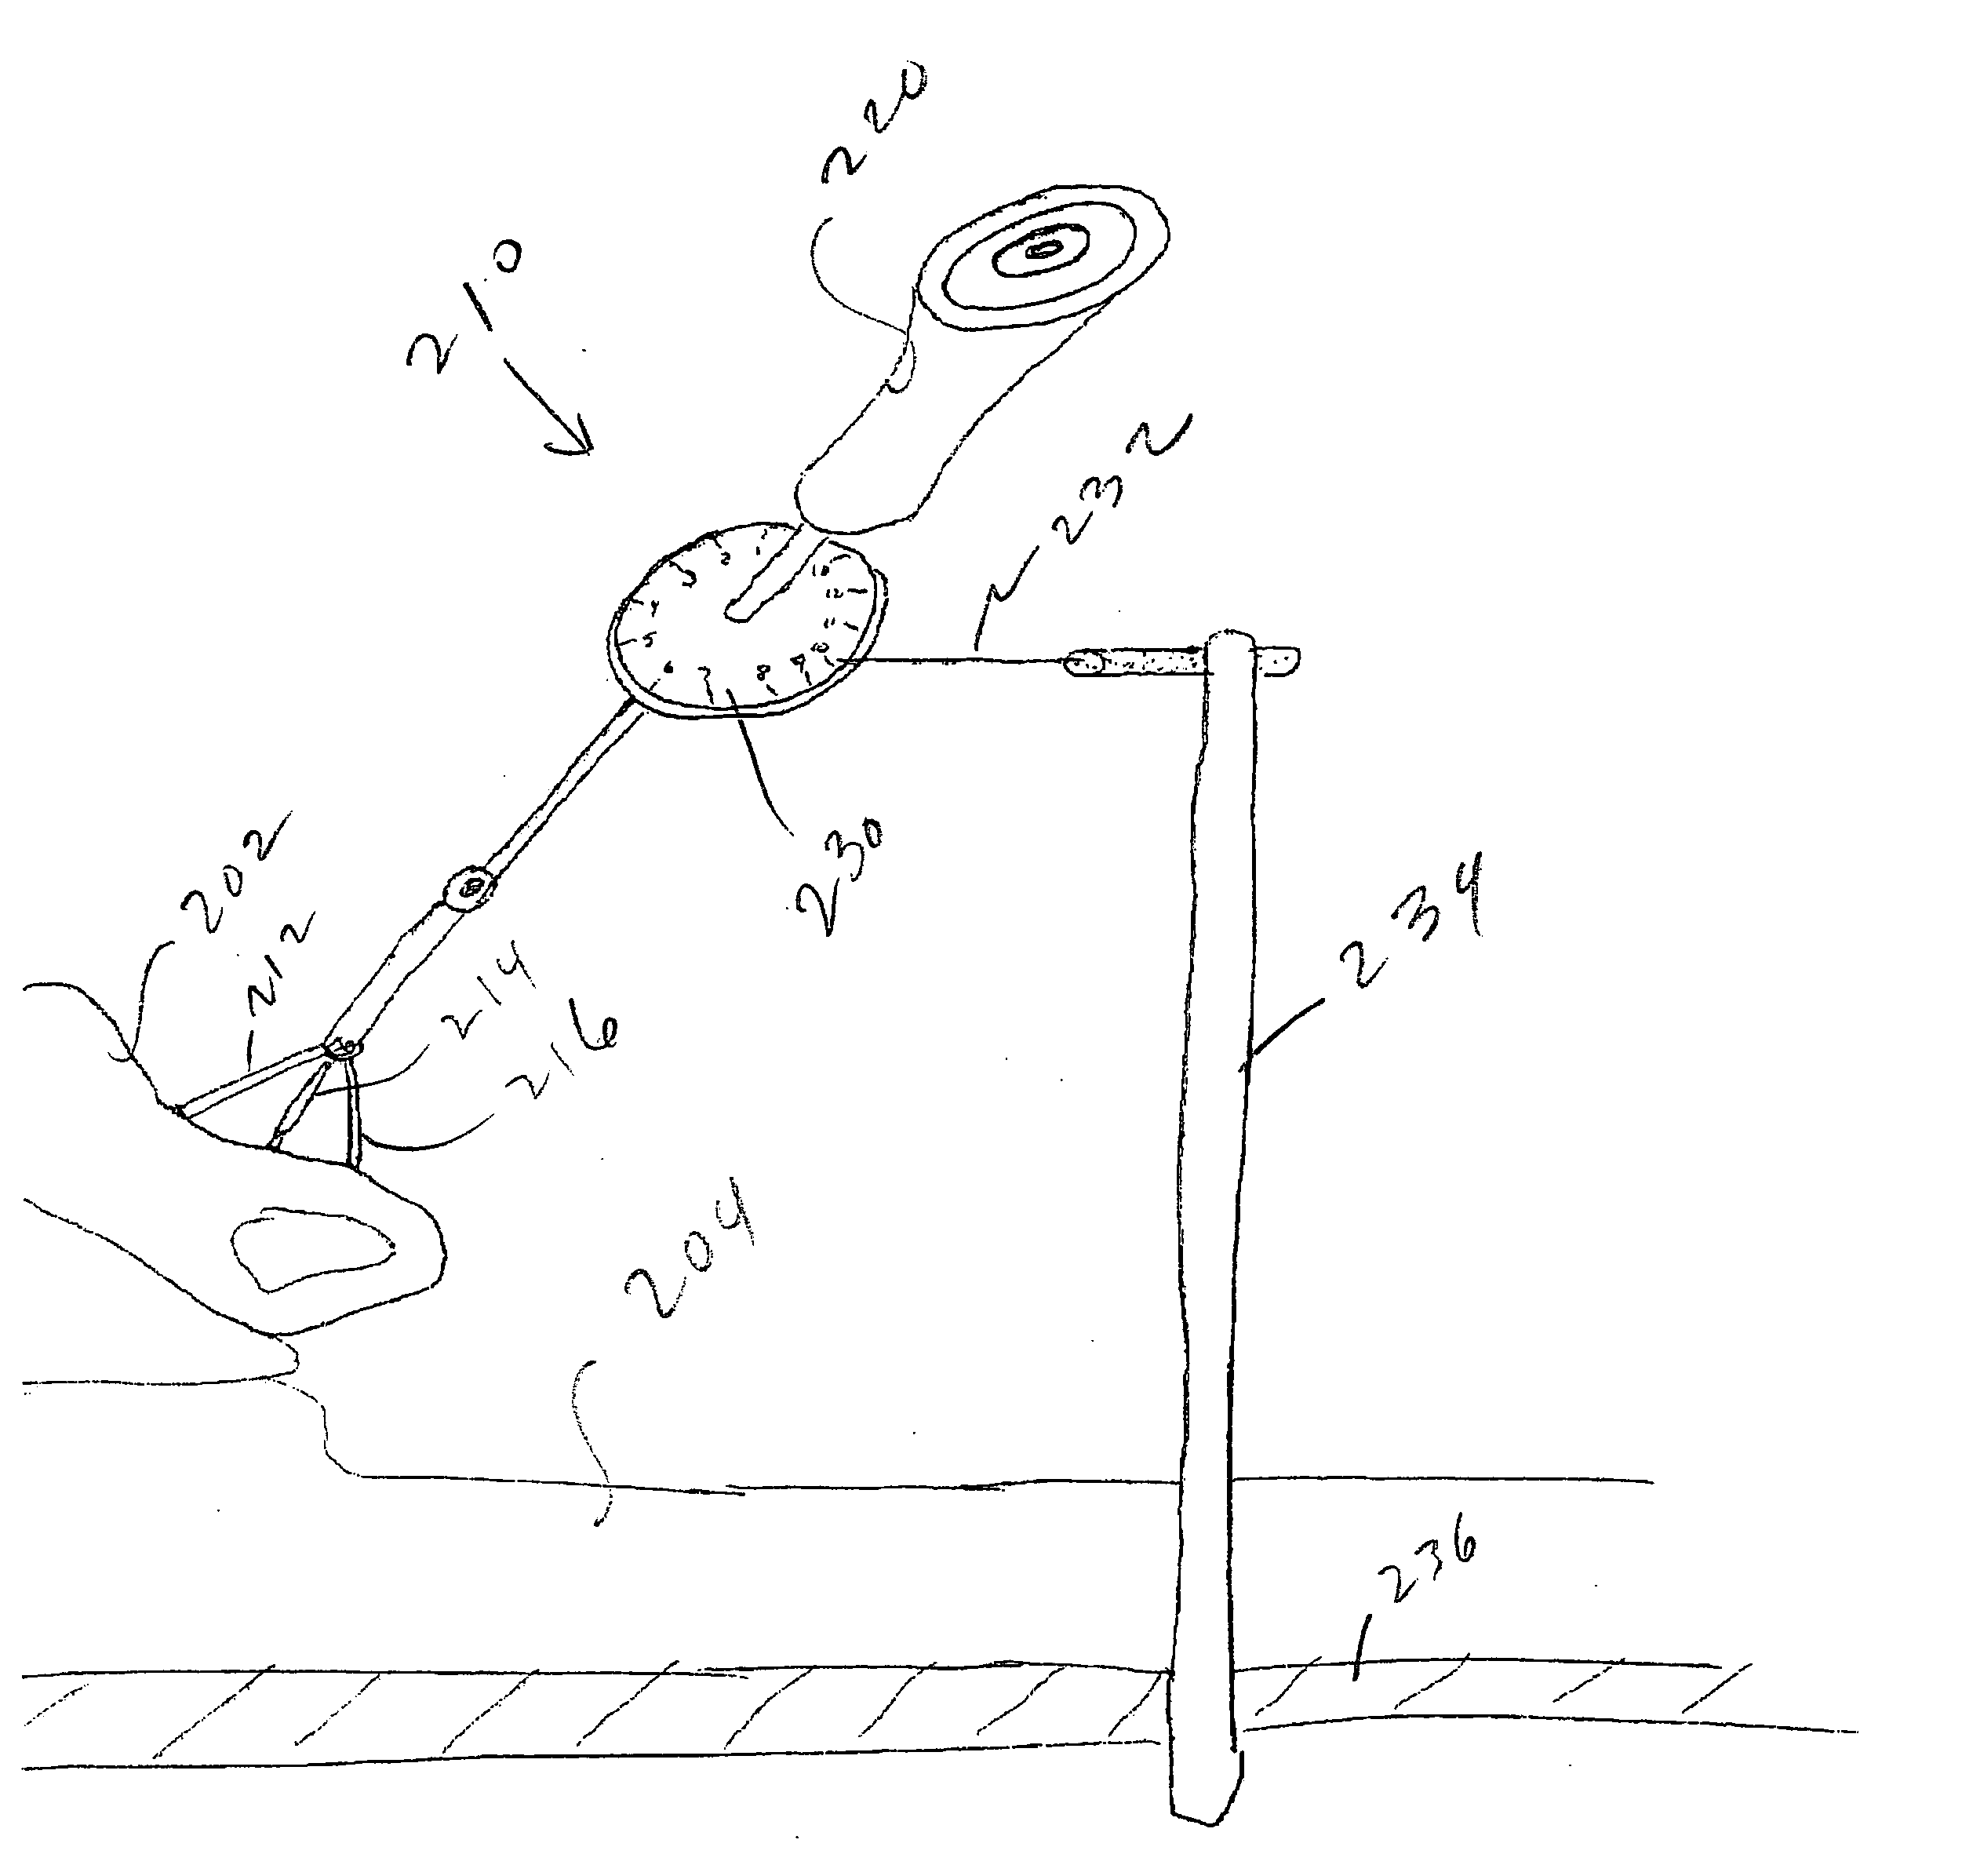 Methods and apparatus for artificial disc replacement (ADR) insertion and other surgical procedures